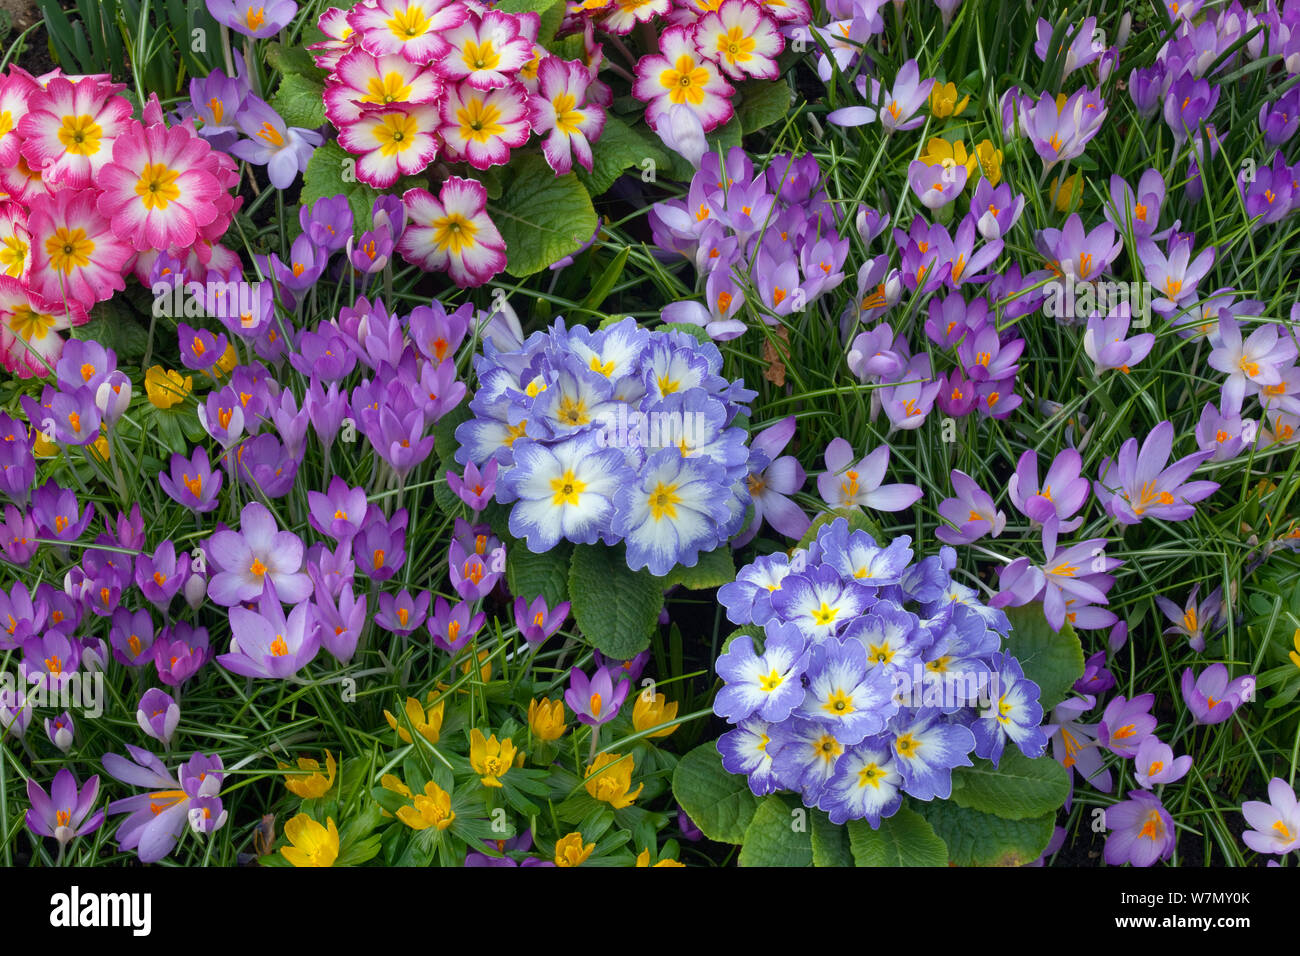 Spring Crocus Aconites Polyanthus and snowdrops in Garden Setting Norfolk March Stock Photo